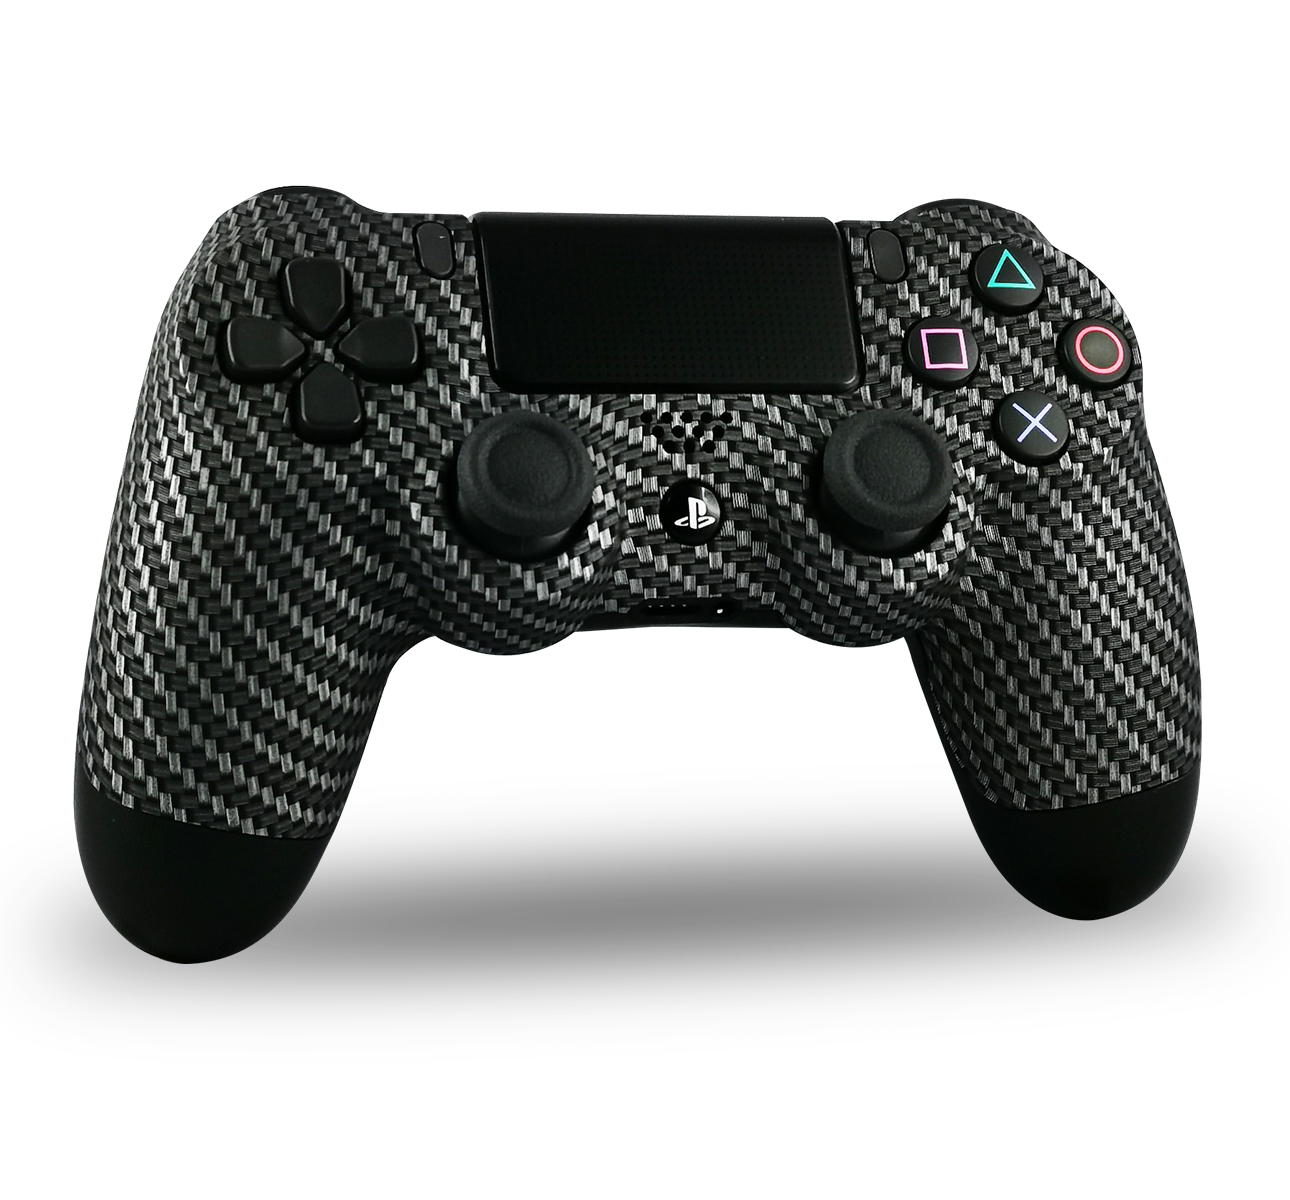 manette-PS4-custom-playstation-4-sony-personnalisee-drawmypad-carbone